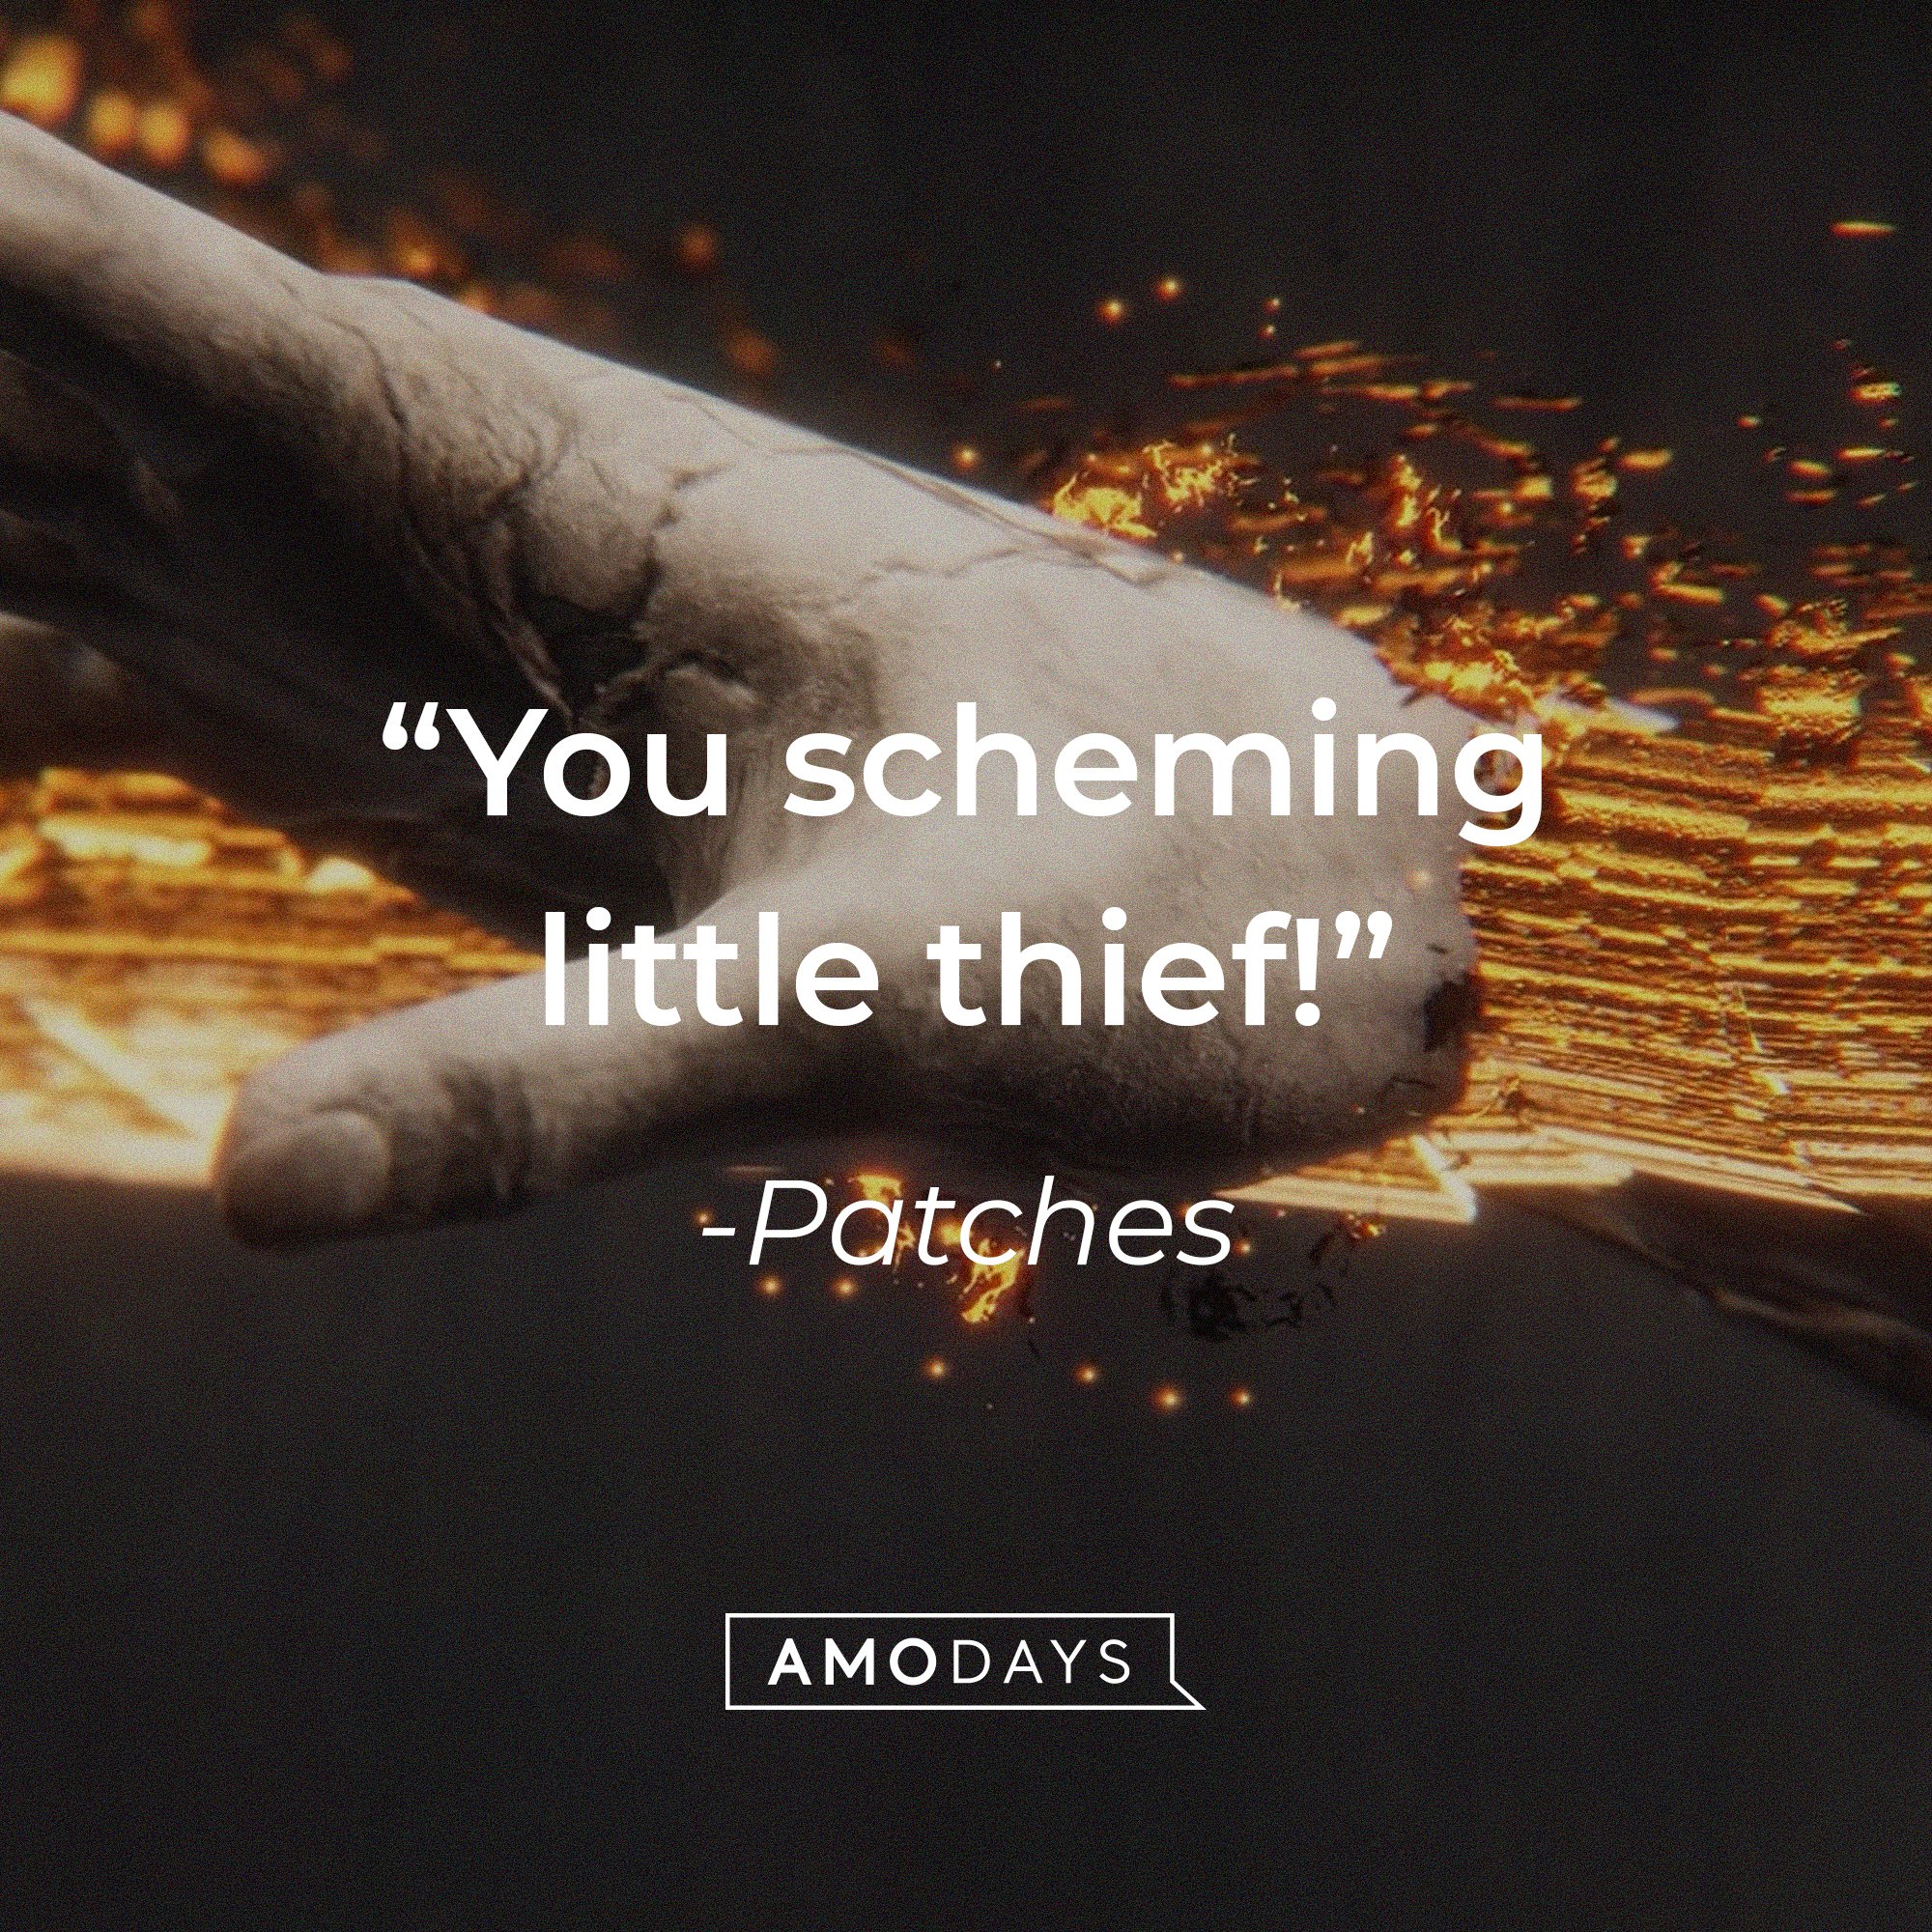 Patches’ quote: "You scheming little thief!" | Image: AmoDays